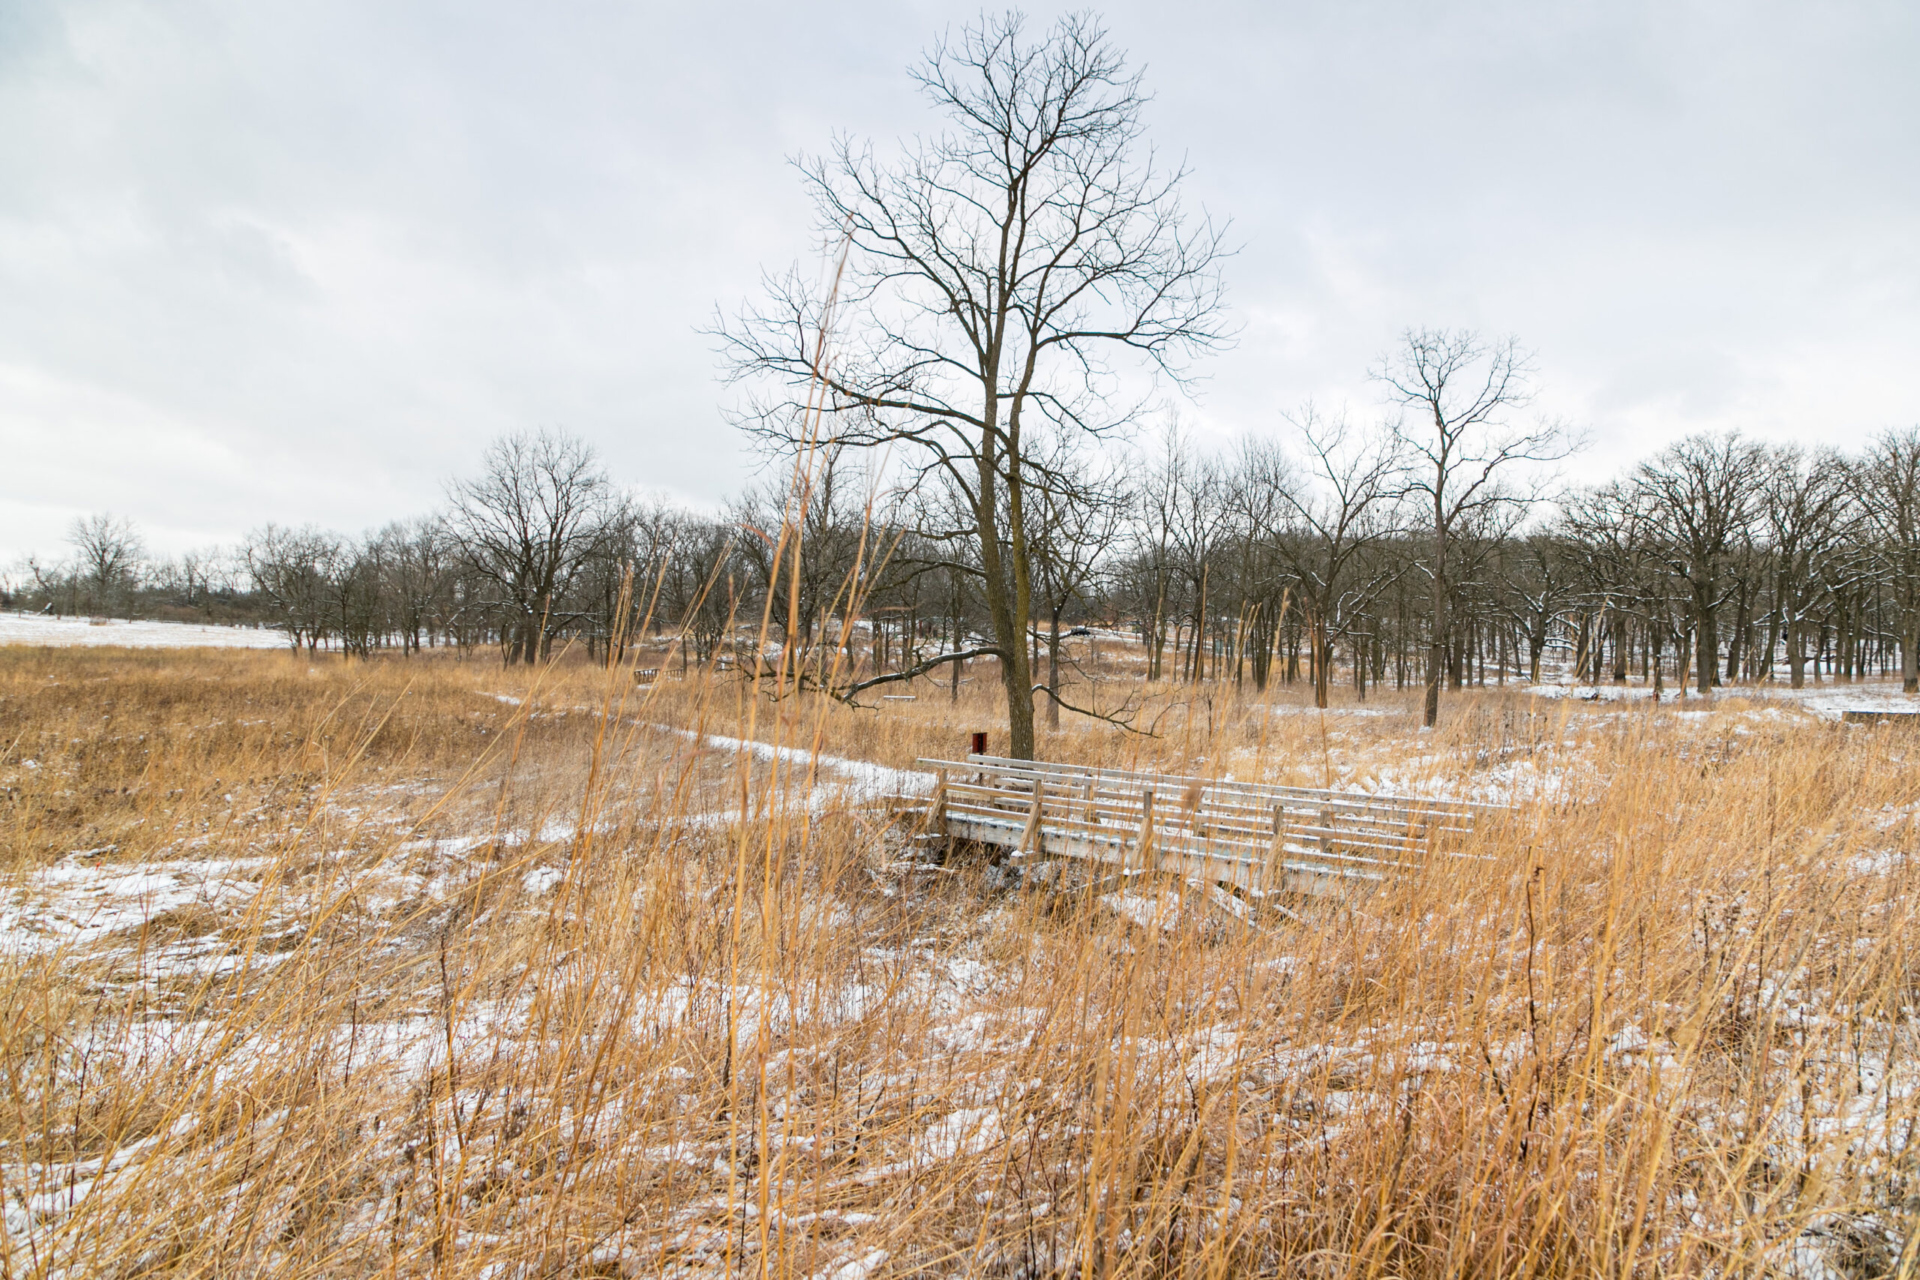 The prairie with a light coating of snow in the winter.